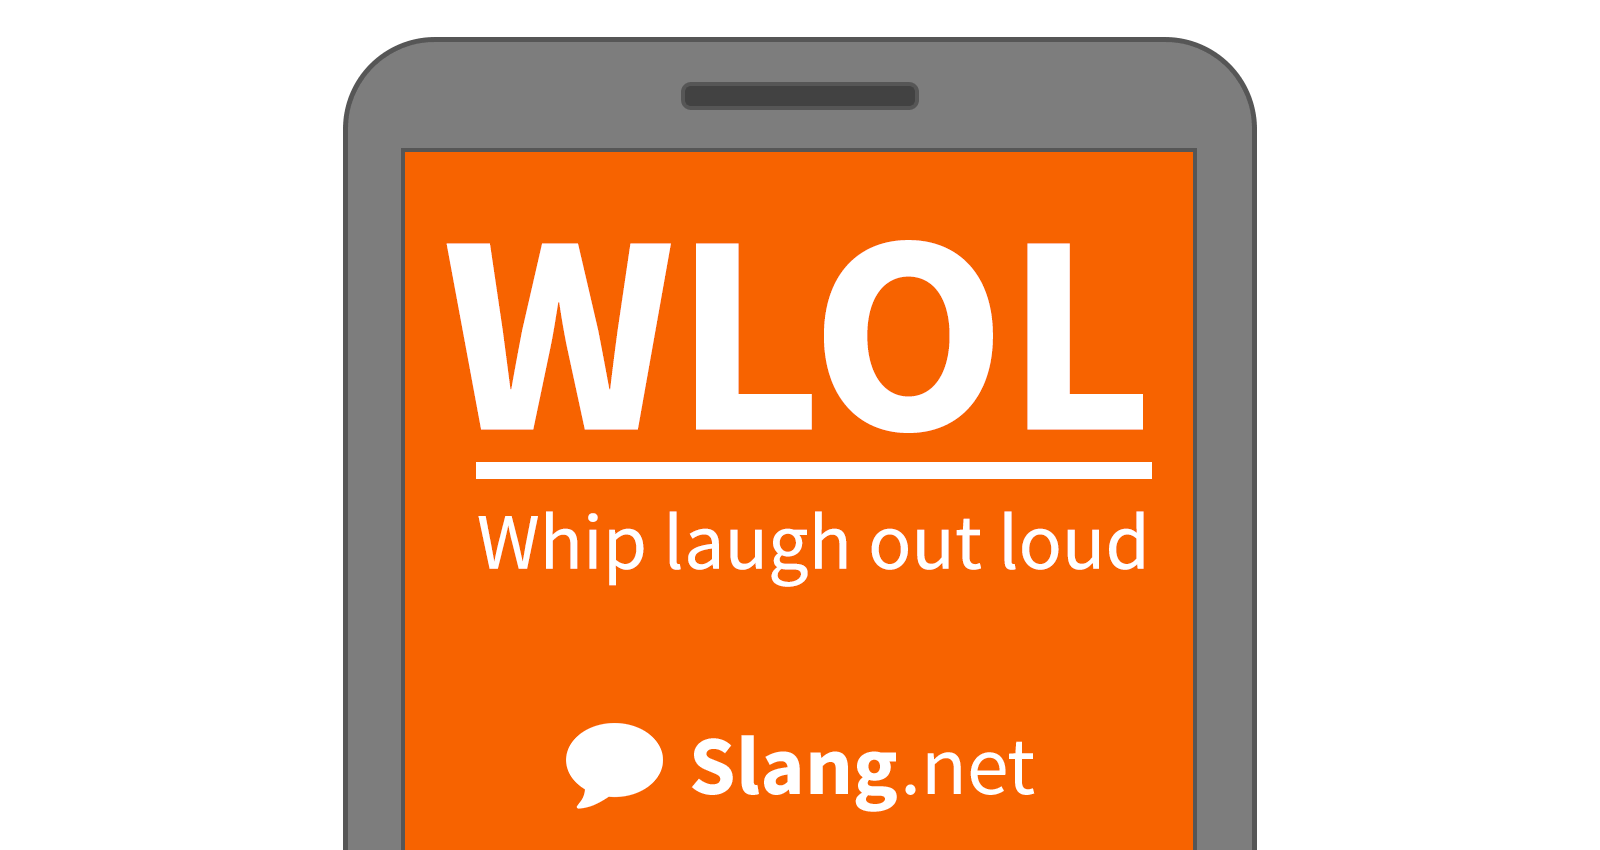 You will likely only see WLOL in messages